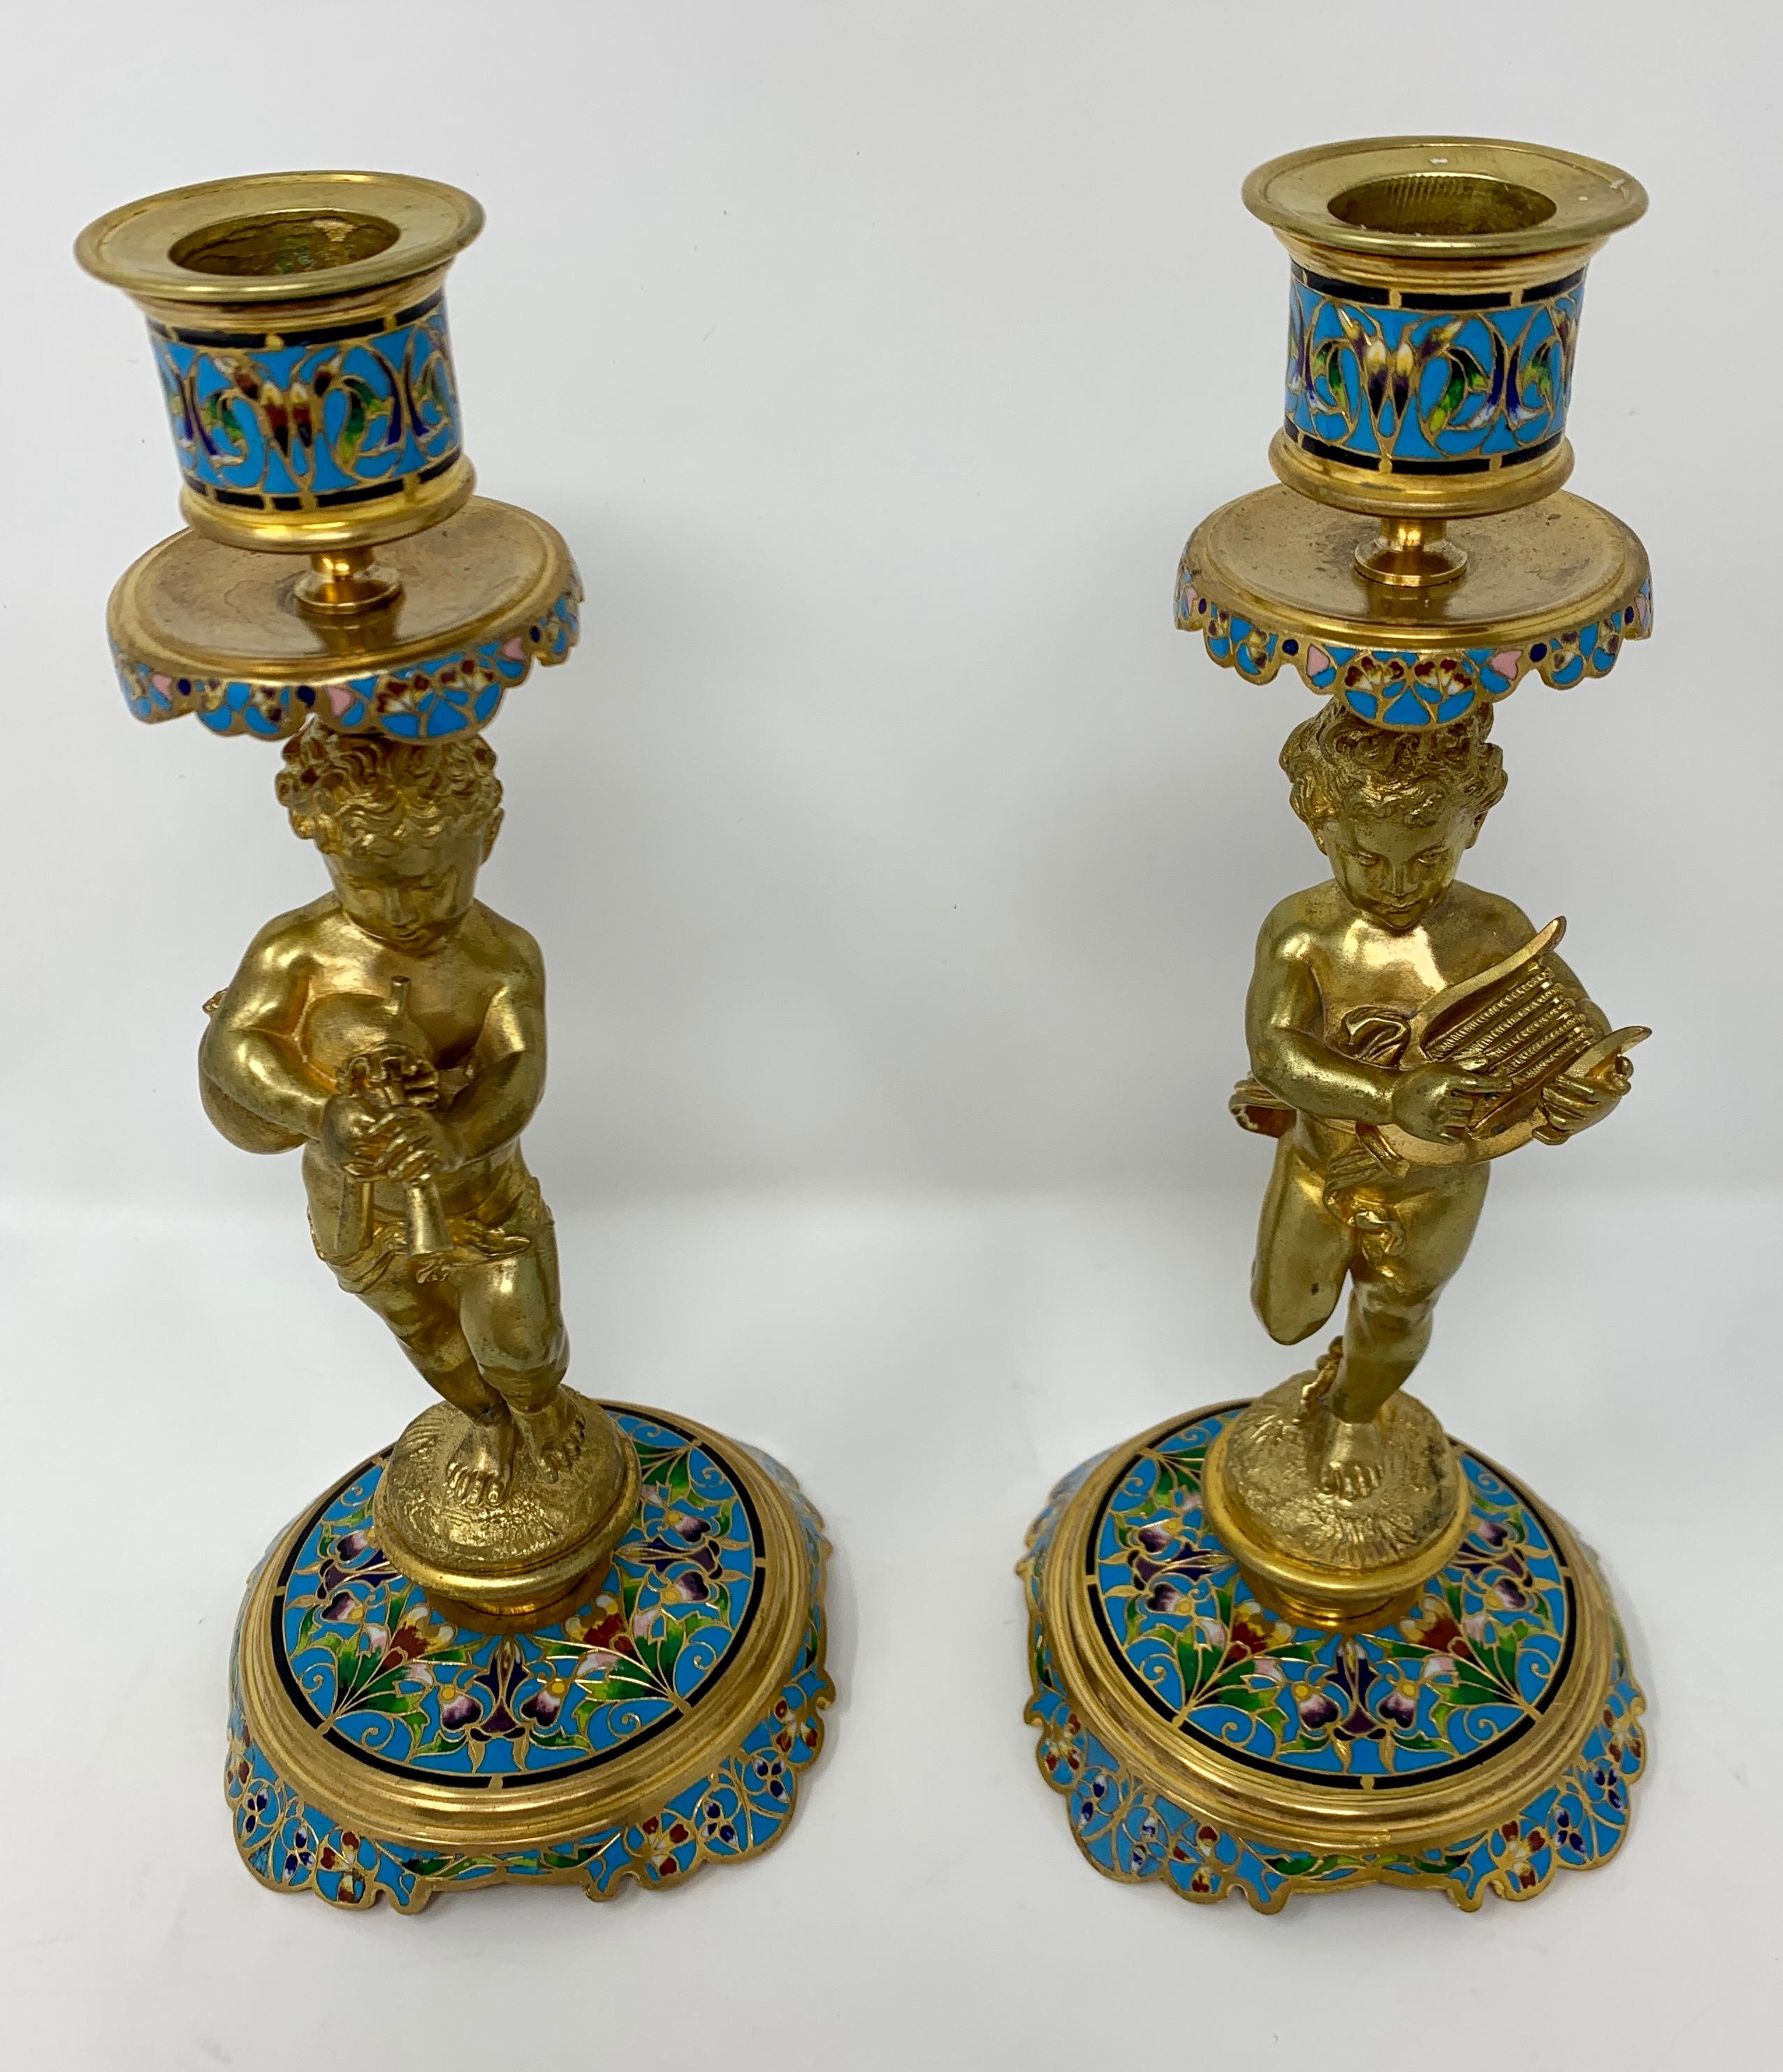 A charming pair of candlesticks whose cherubs are sporting musical instruments.
